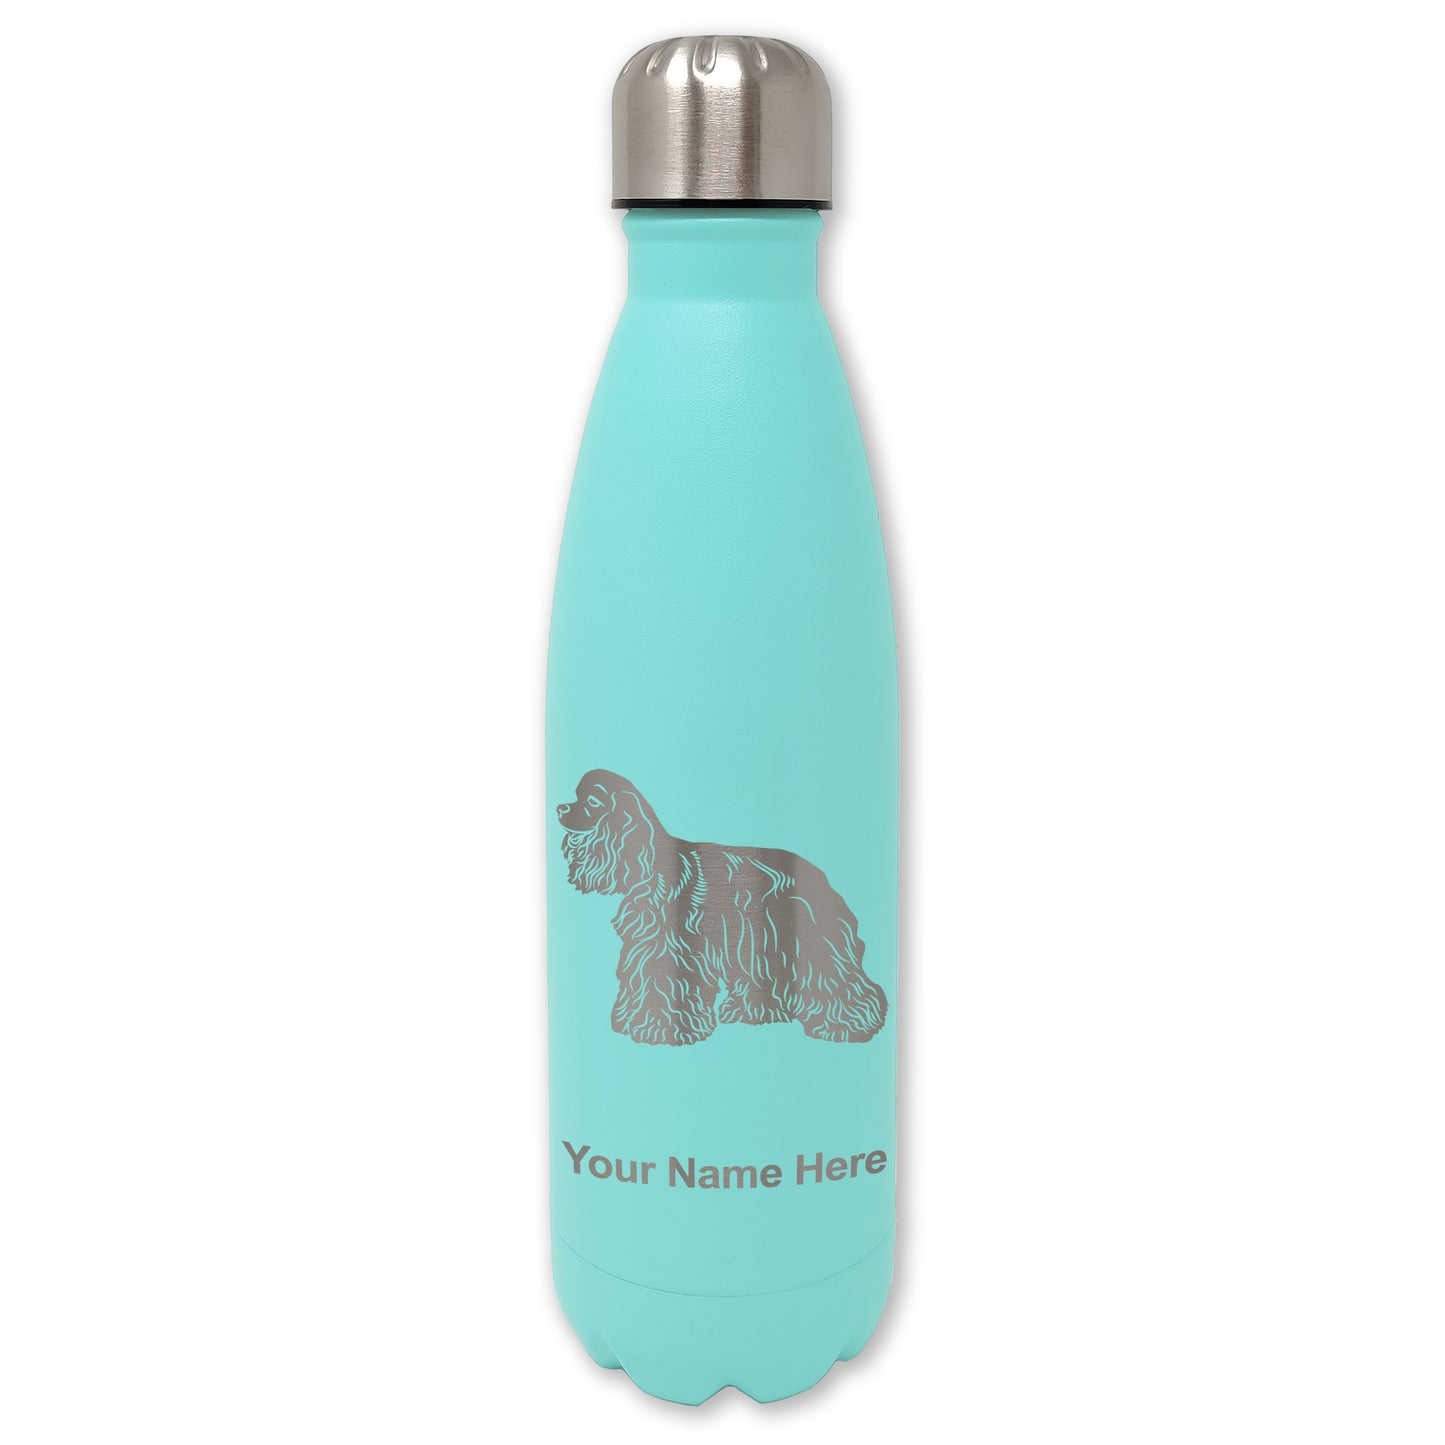 LaserGram Double Wall Water Bottle, Cocker Spaniel Dog, Personalized Engraving Included